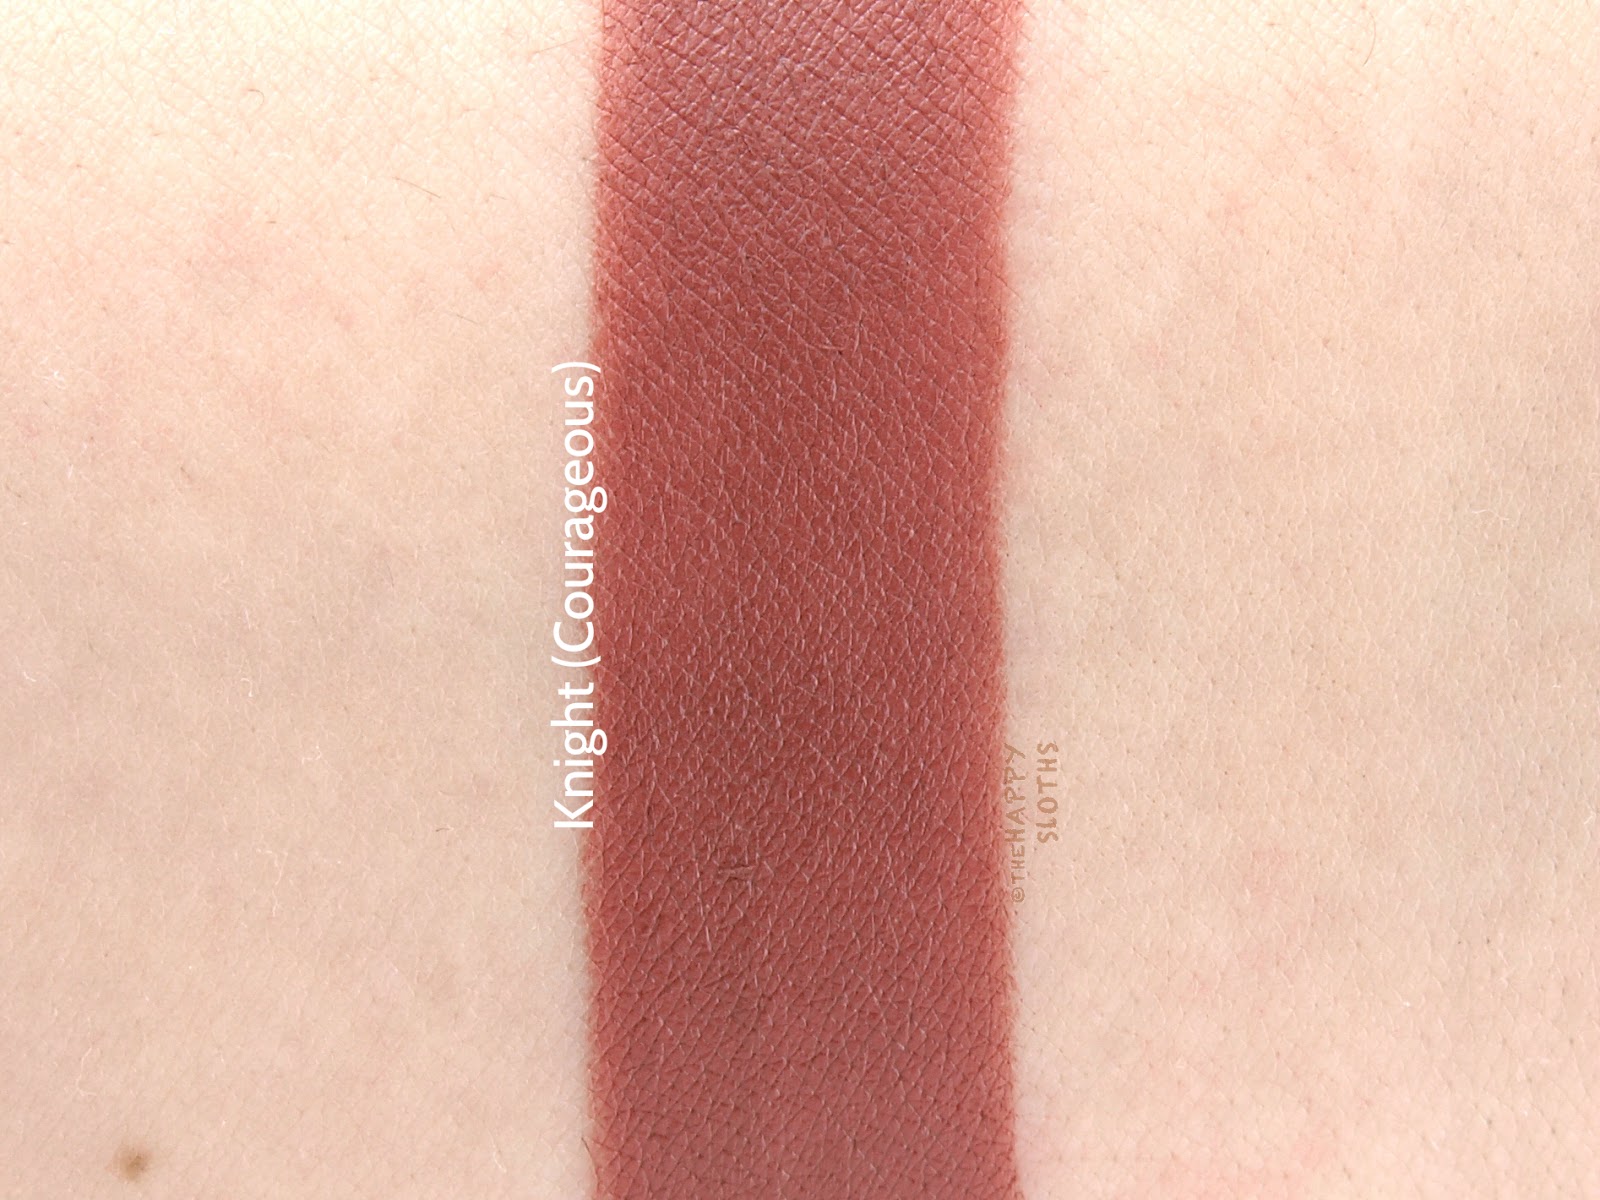 Lipstick Queen Lipstick Chess in "Knight": Review and Swatches